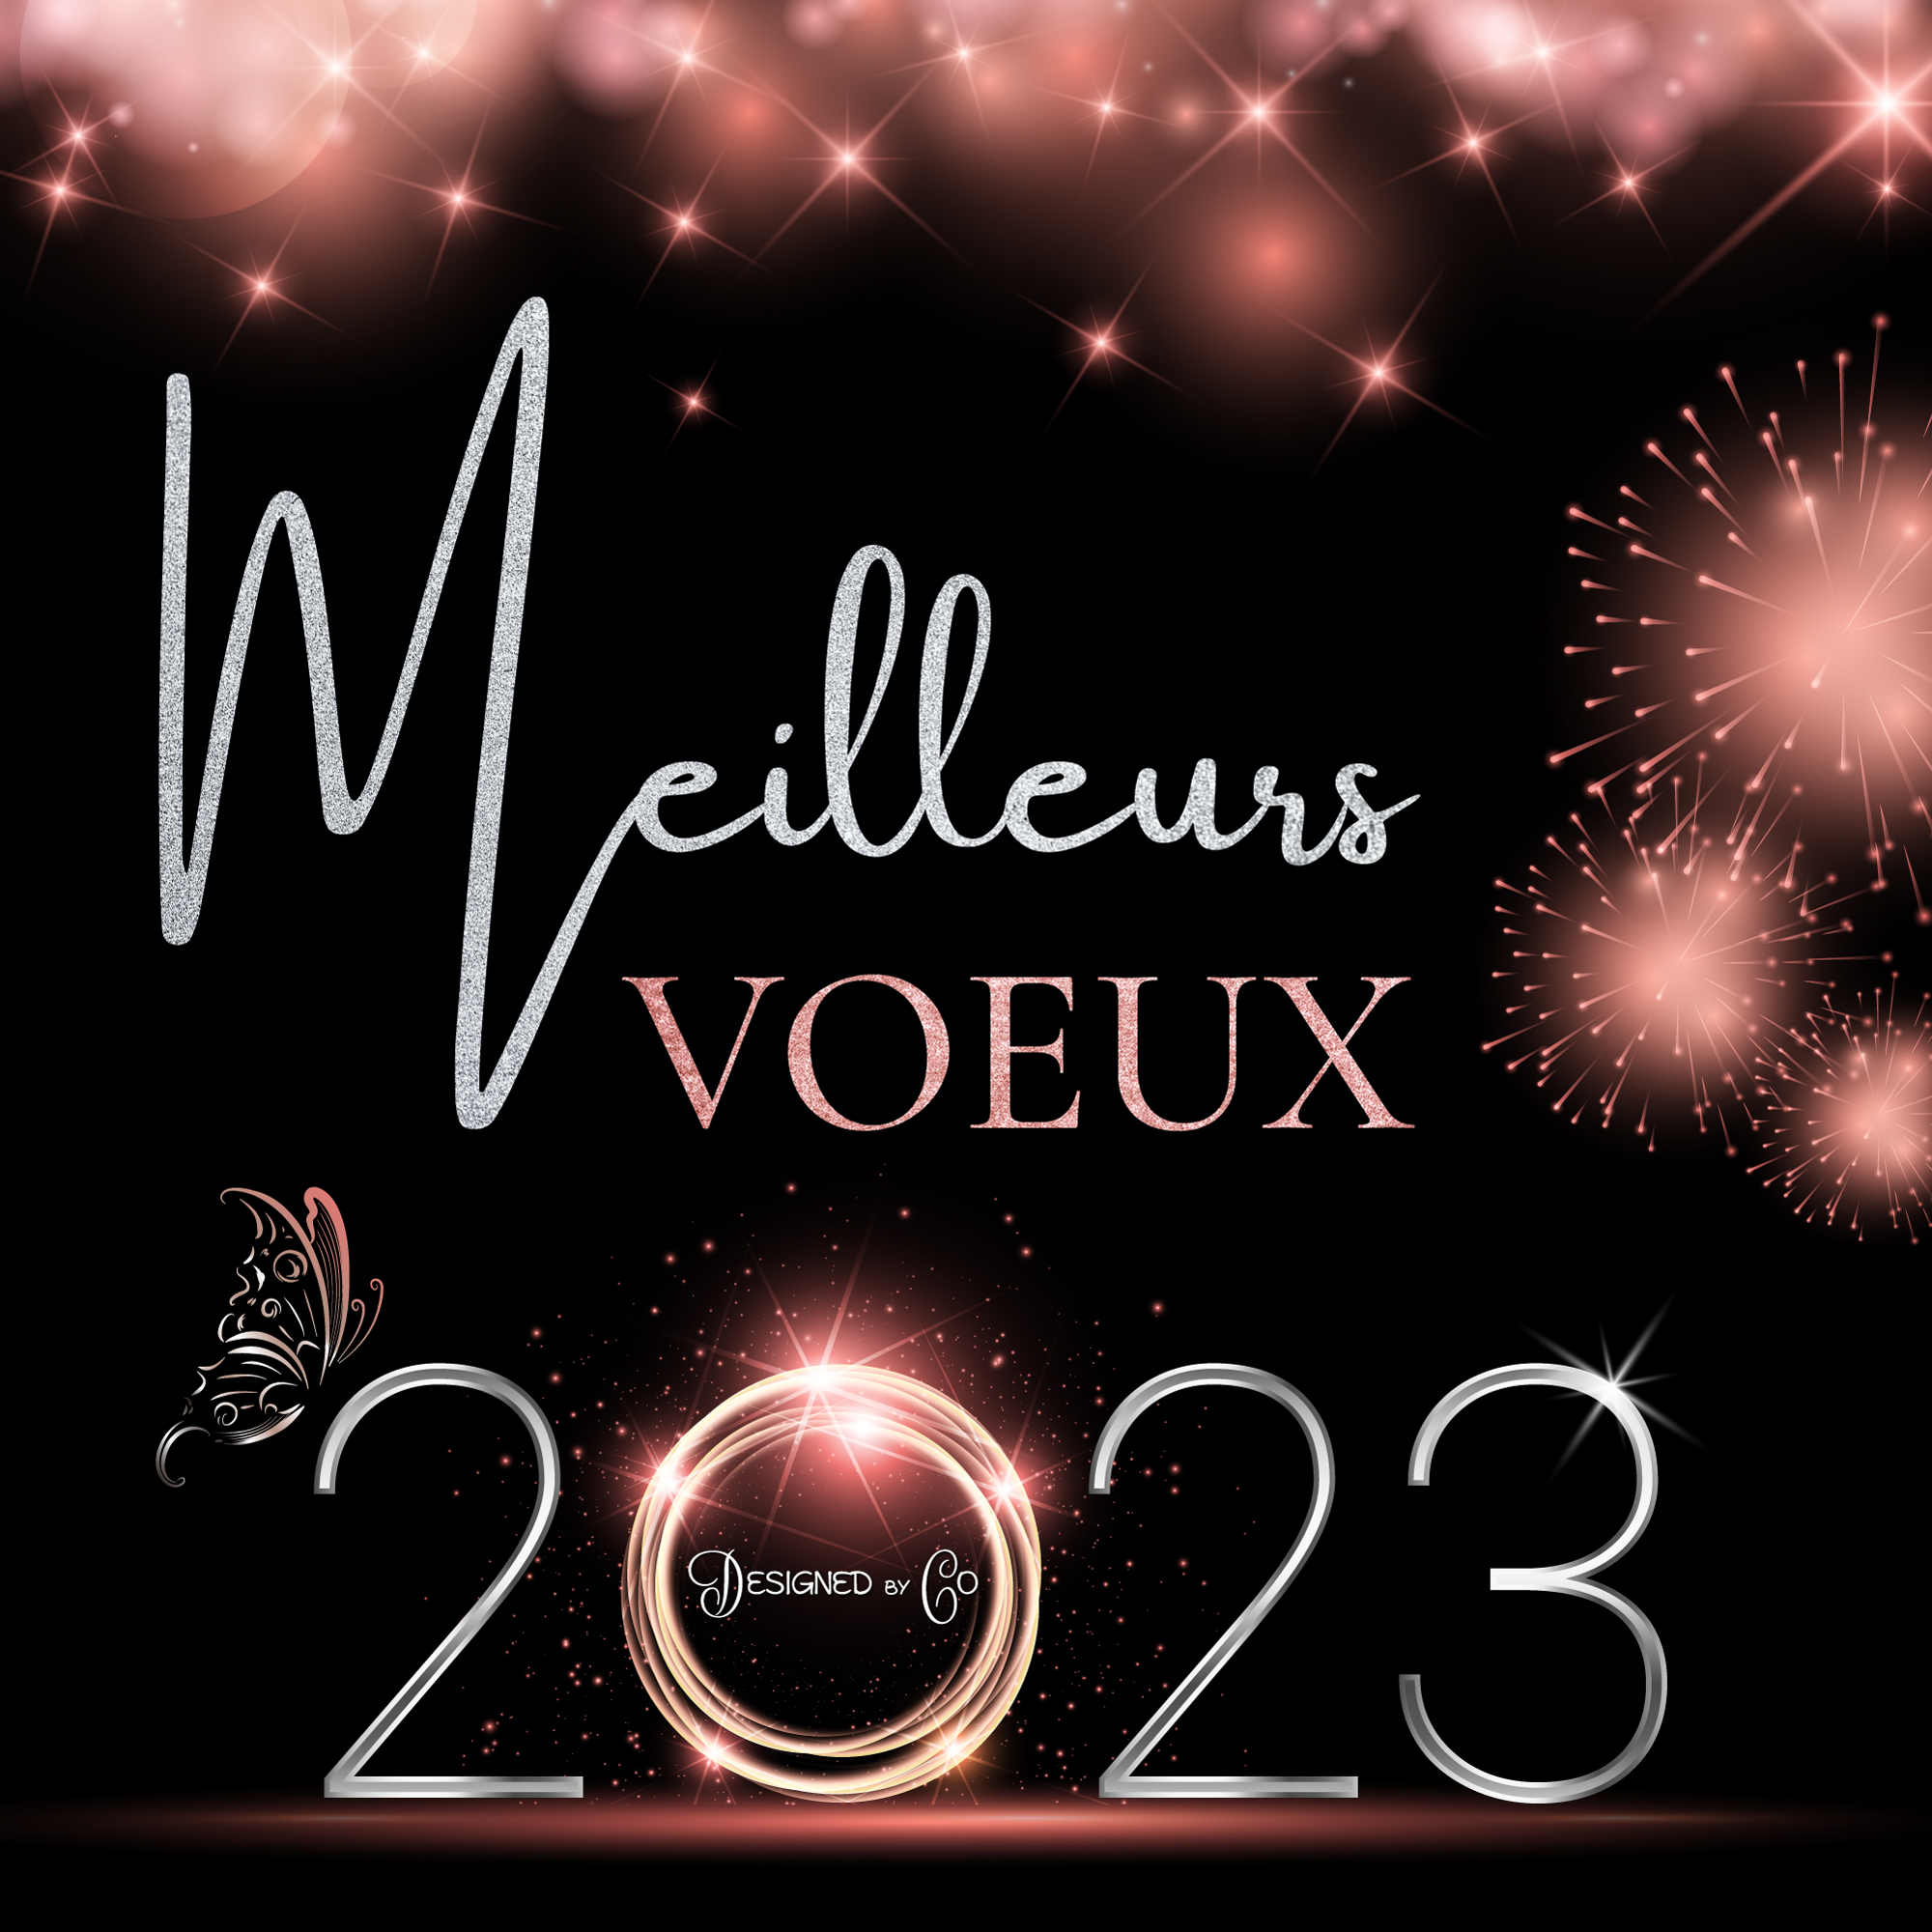 Voeux 2023 Designed by Co